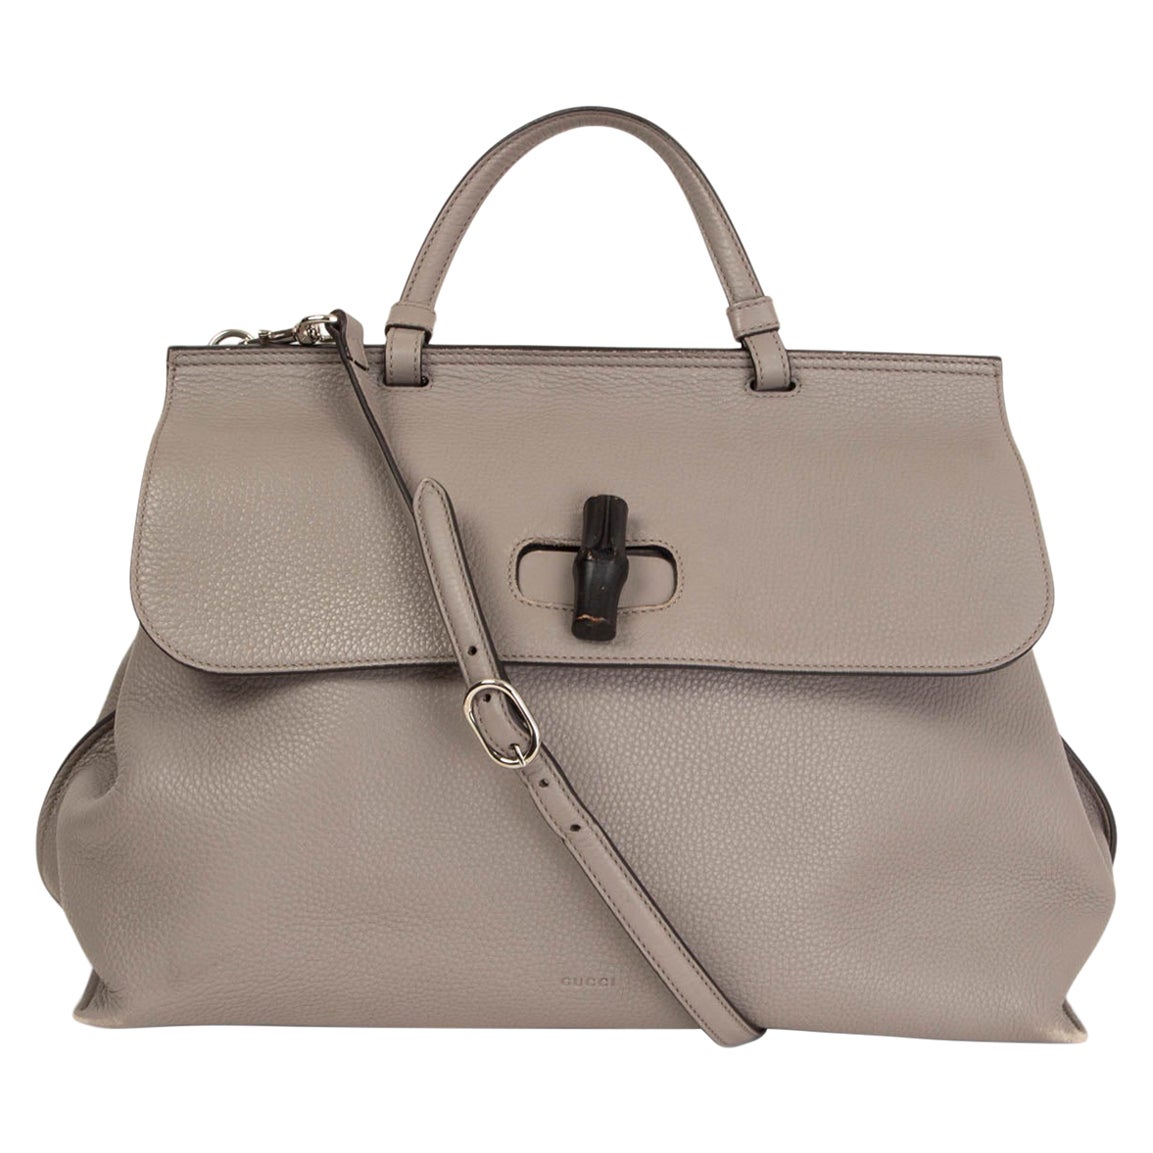 GUCCI grey leather DAILY BAMBOO TOP HANDLE Shoulder Bag